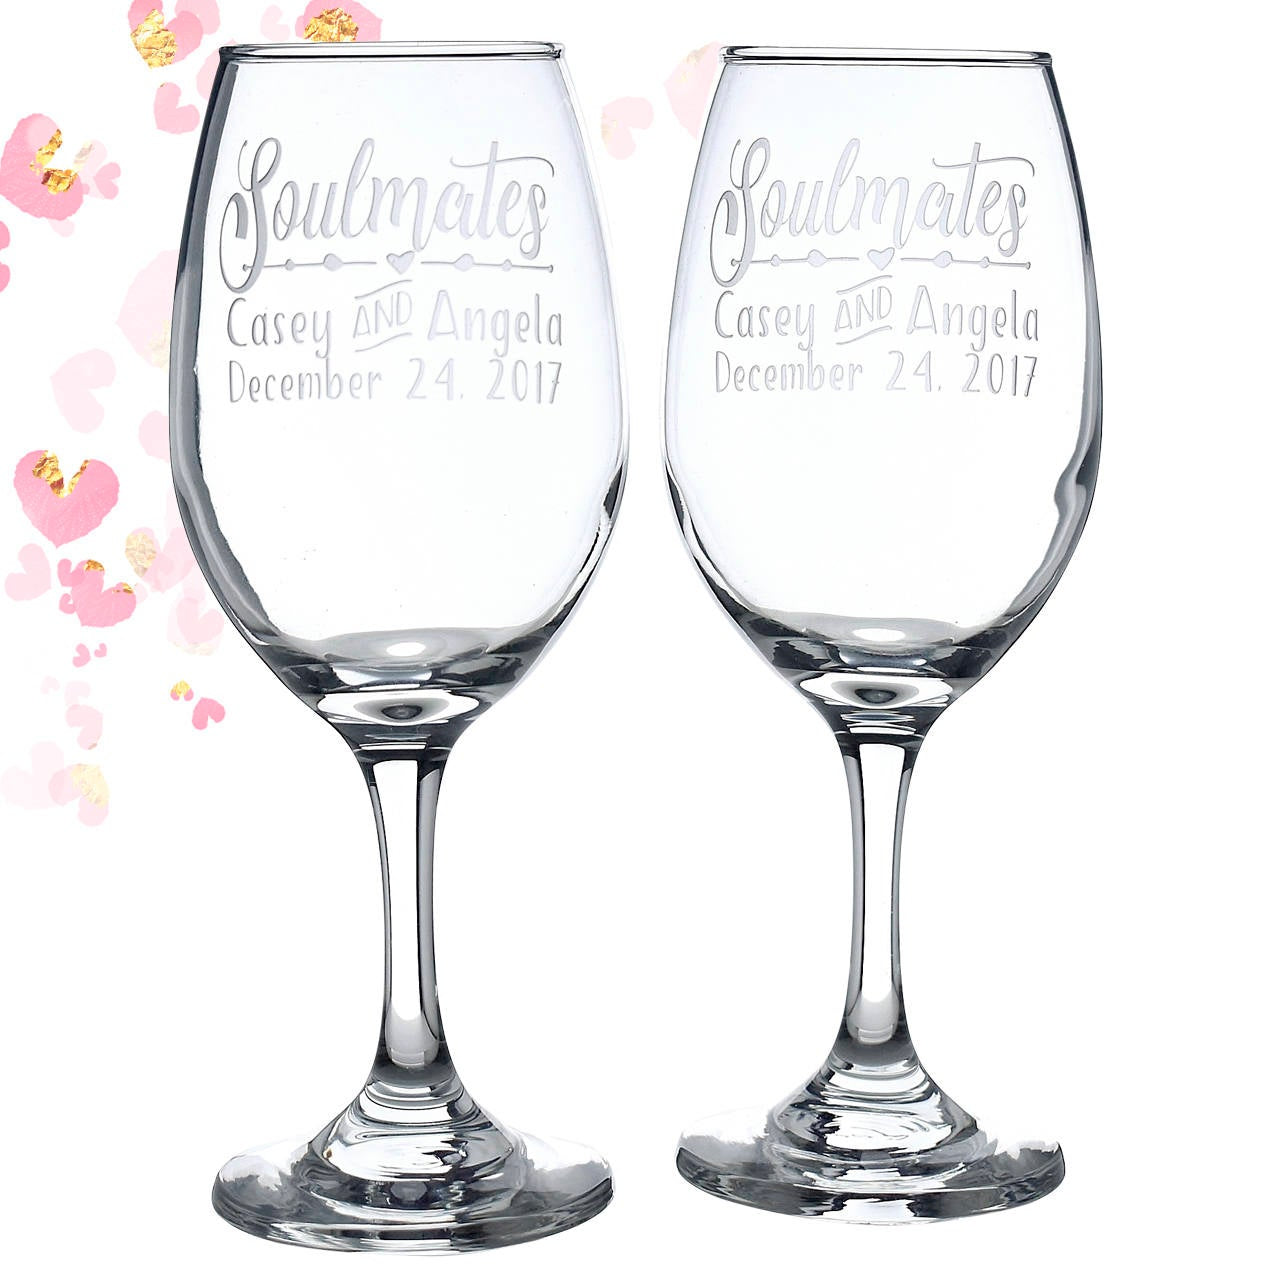 Personalized Crystal Glasses- great Wedding gift